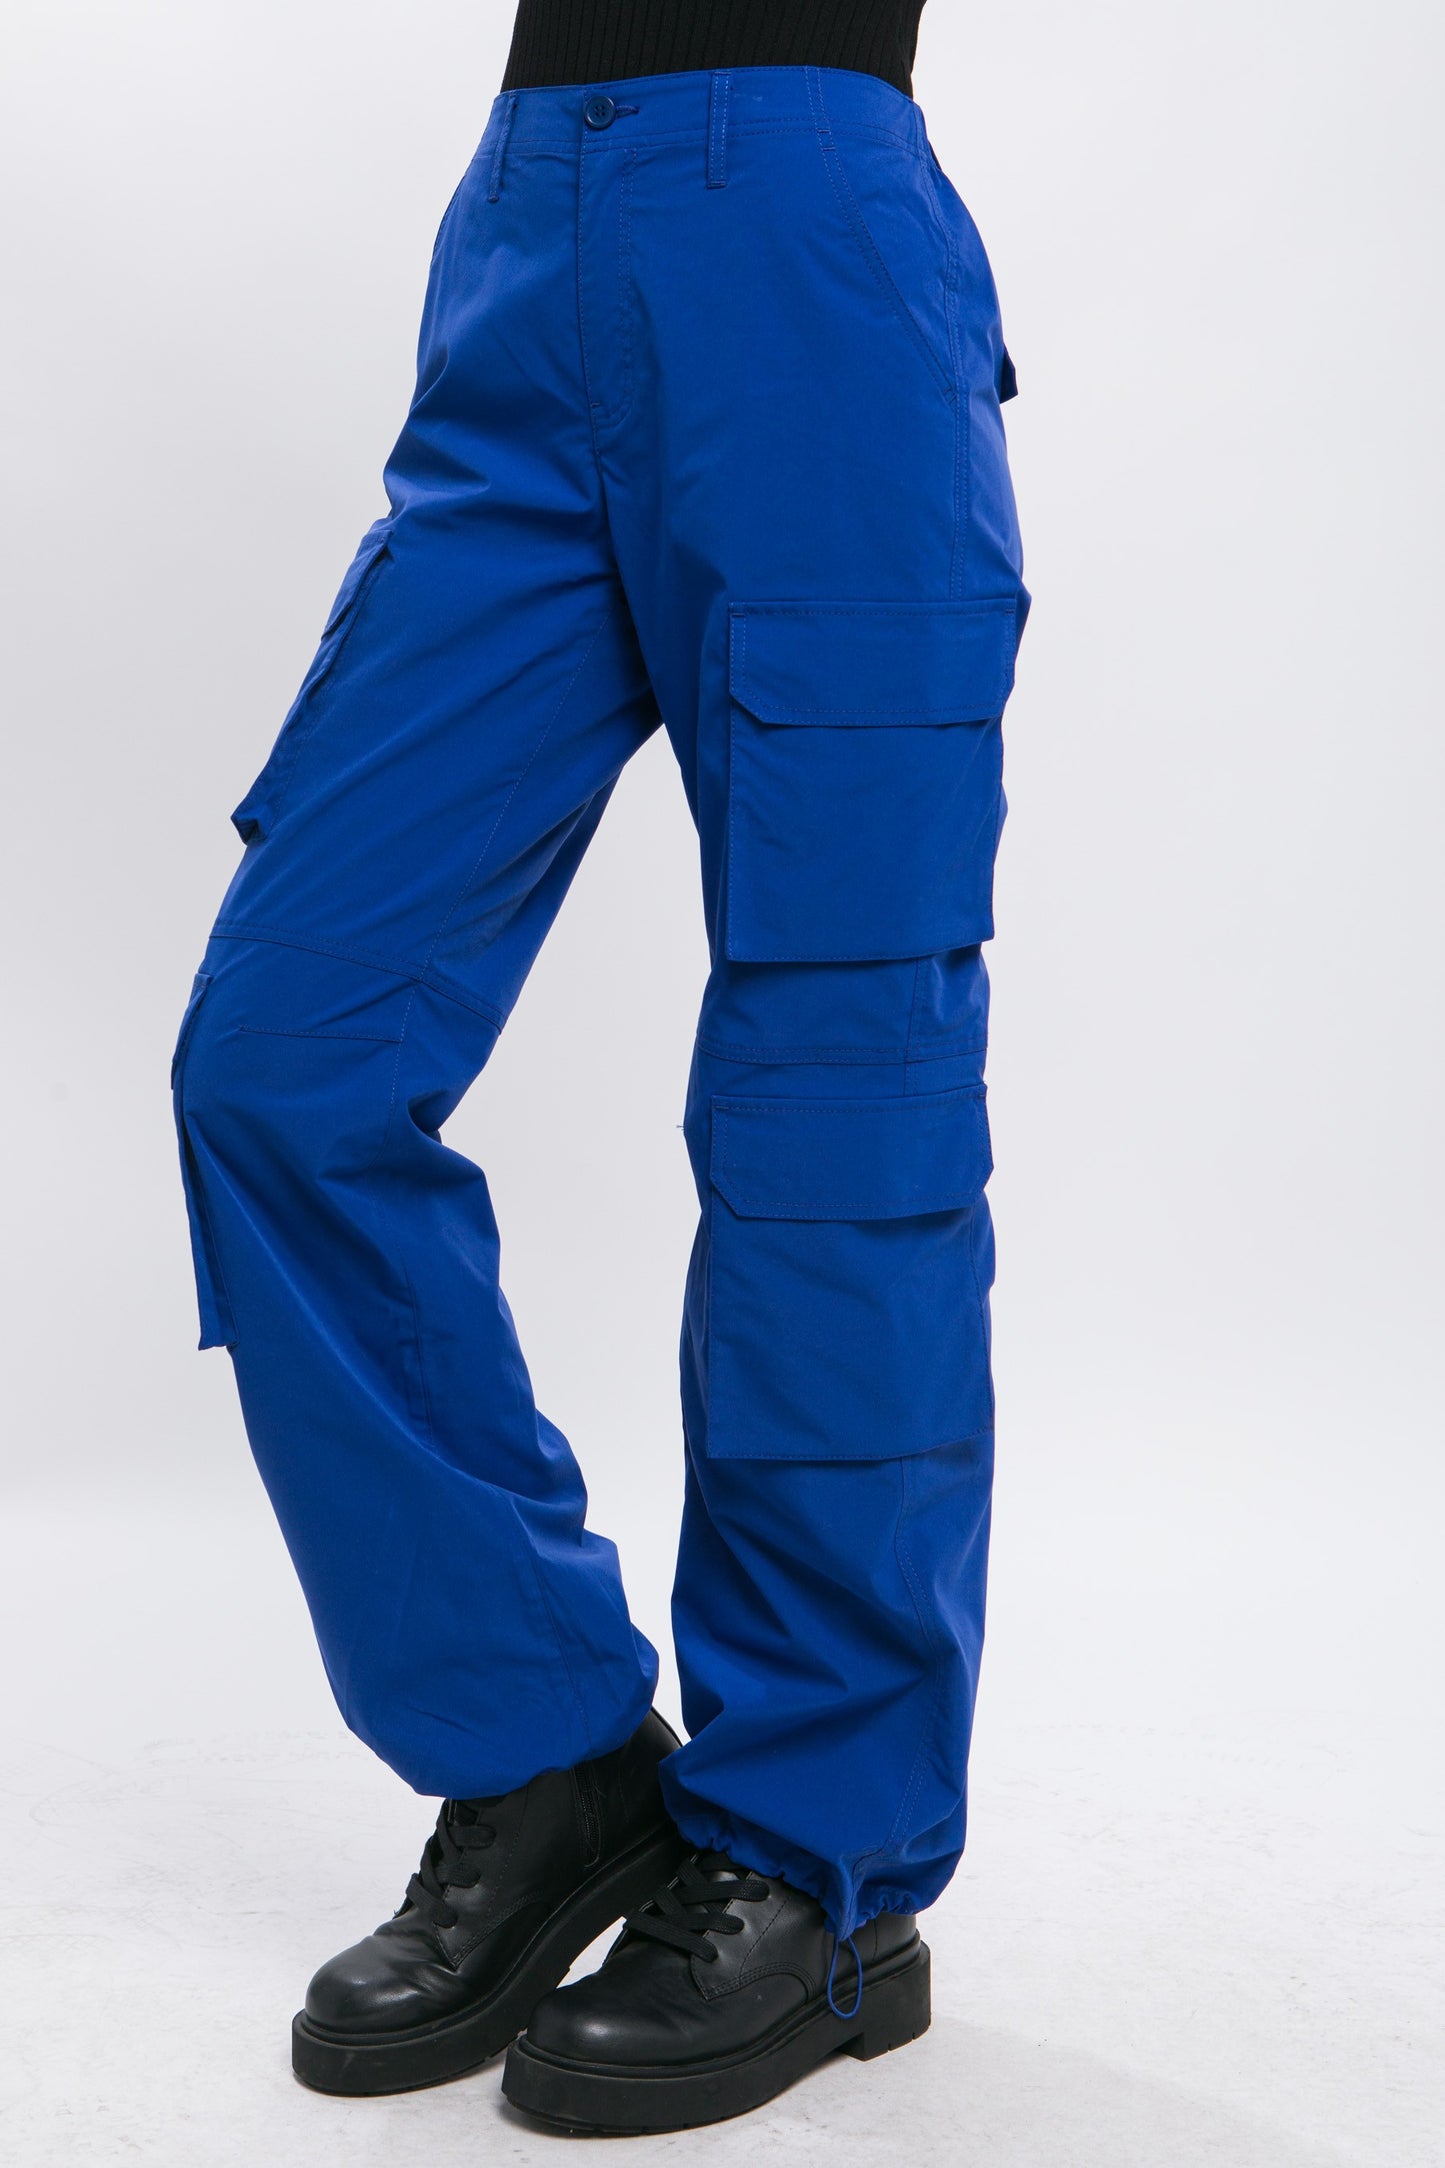 Women's Cargo Pants With Button Closure & Multiple Pockets